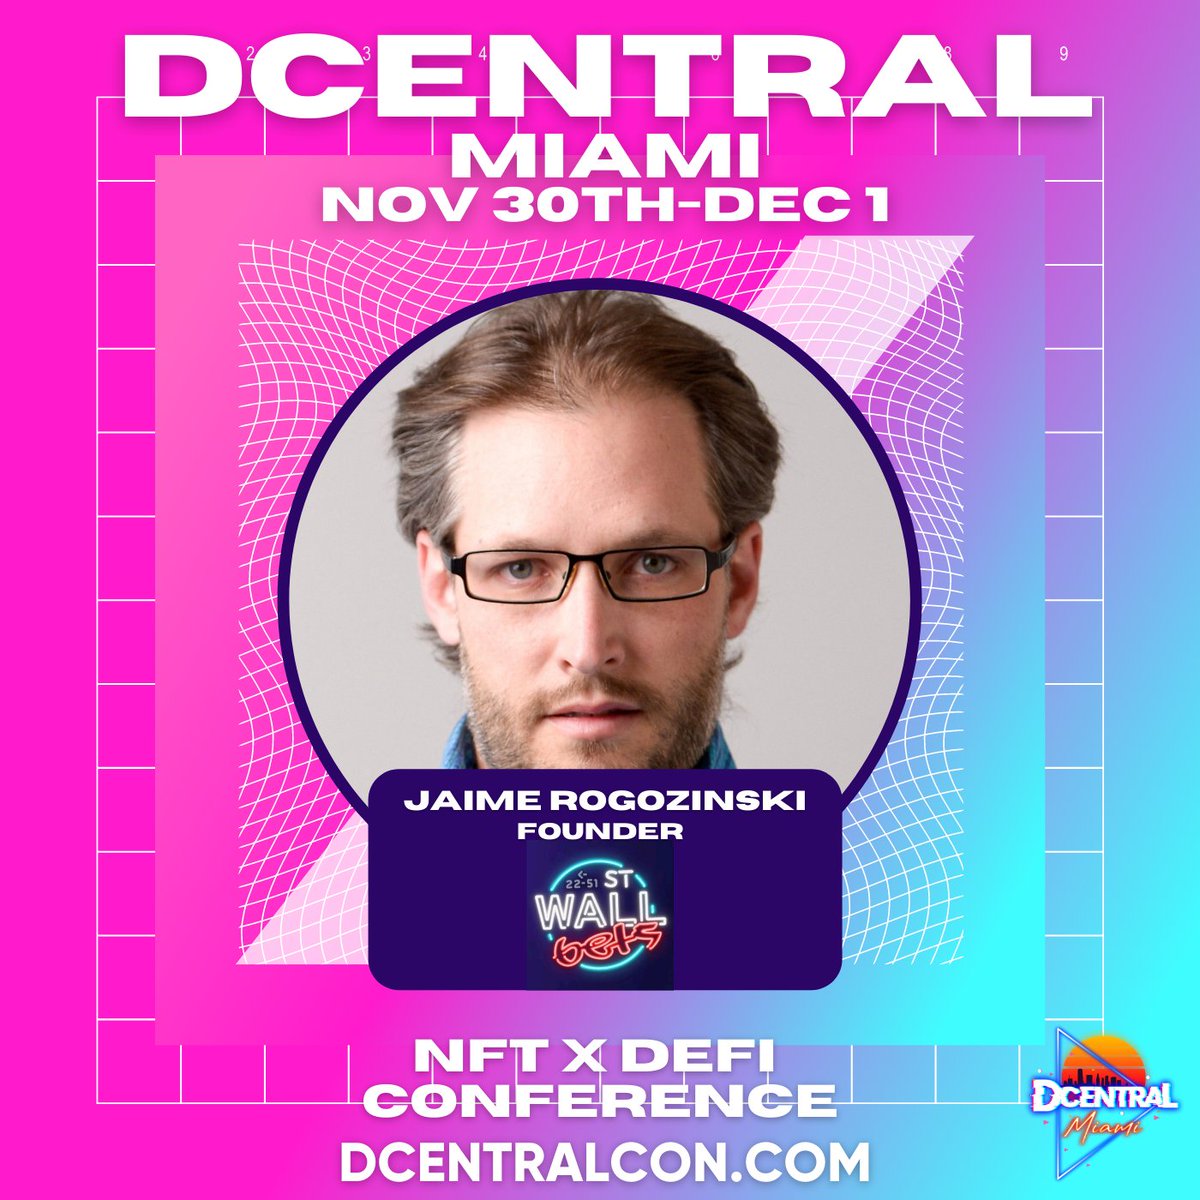 RT @wallstreetbets: Speaking at dcentral Miami next week, followed by the biggest WSB party of the year. Can't wait. https://t.co/8dQMLgF8mN